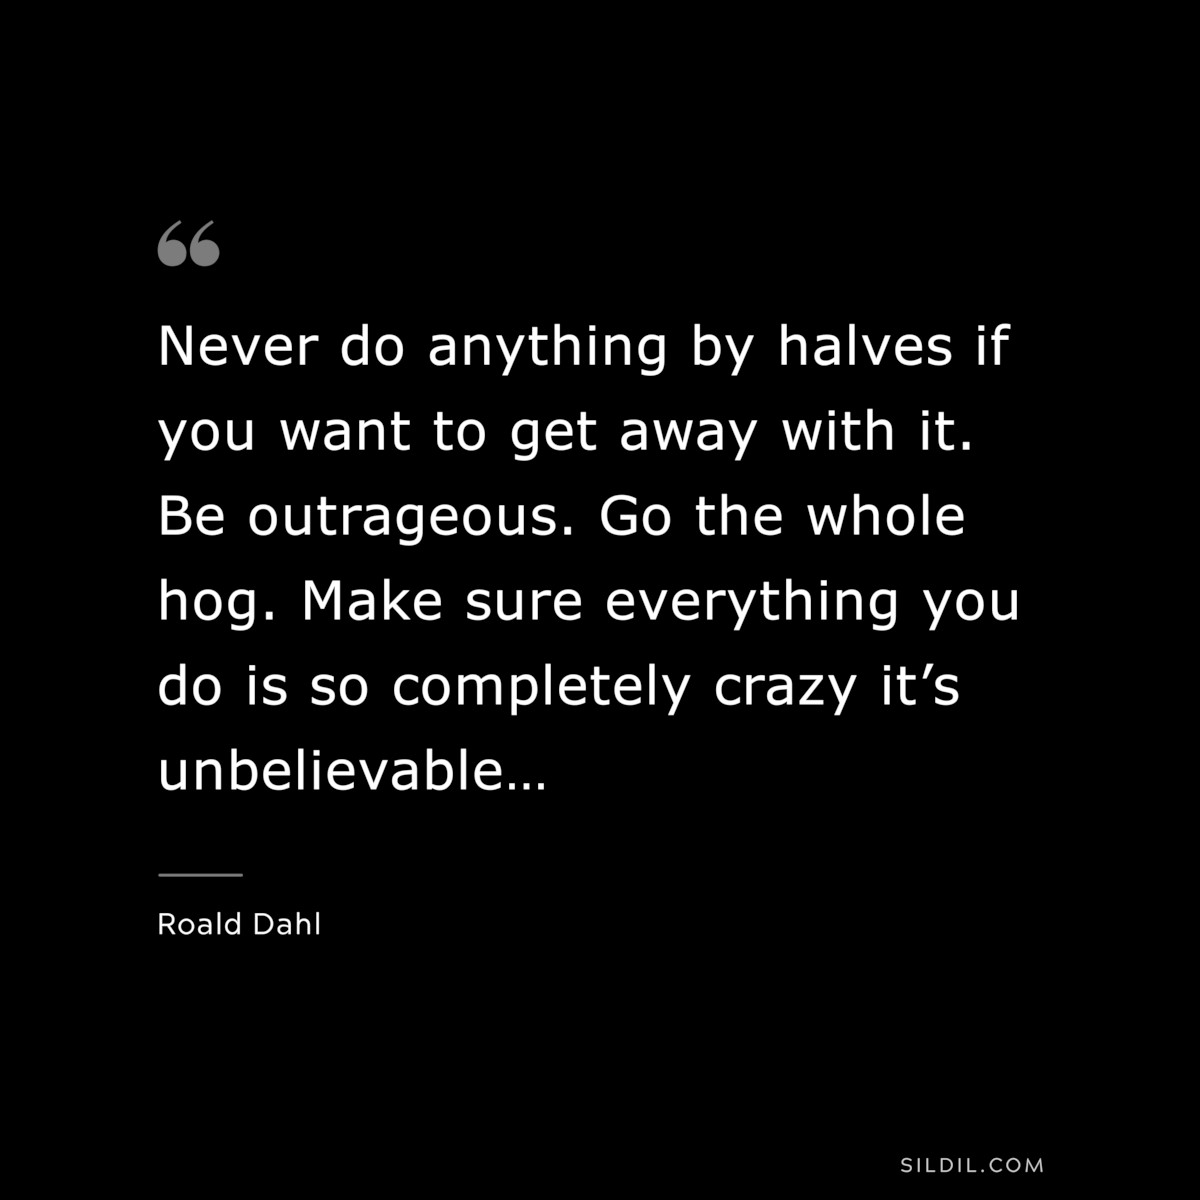 Never do anything by halves if you want to get away with it. Be outrageous. Go the whole hog. Make sure everything you do is so completely crazy it’s unbelievable… ― Roald Dahl